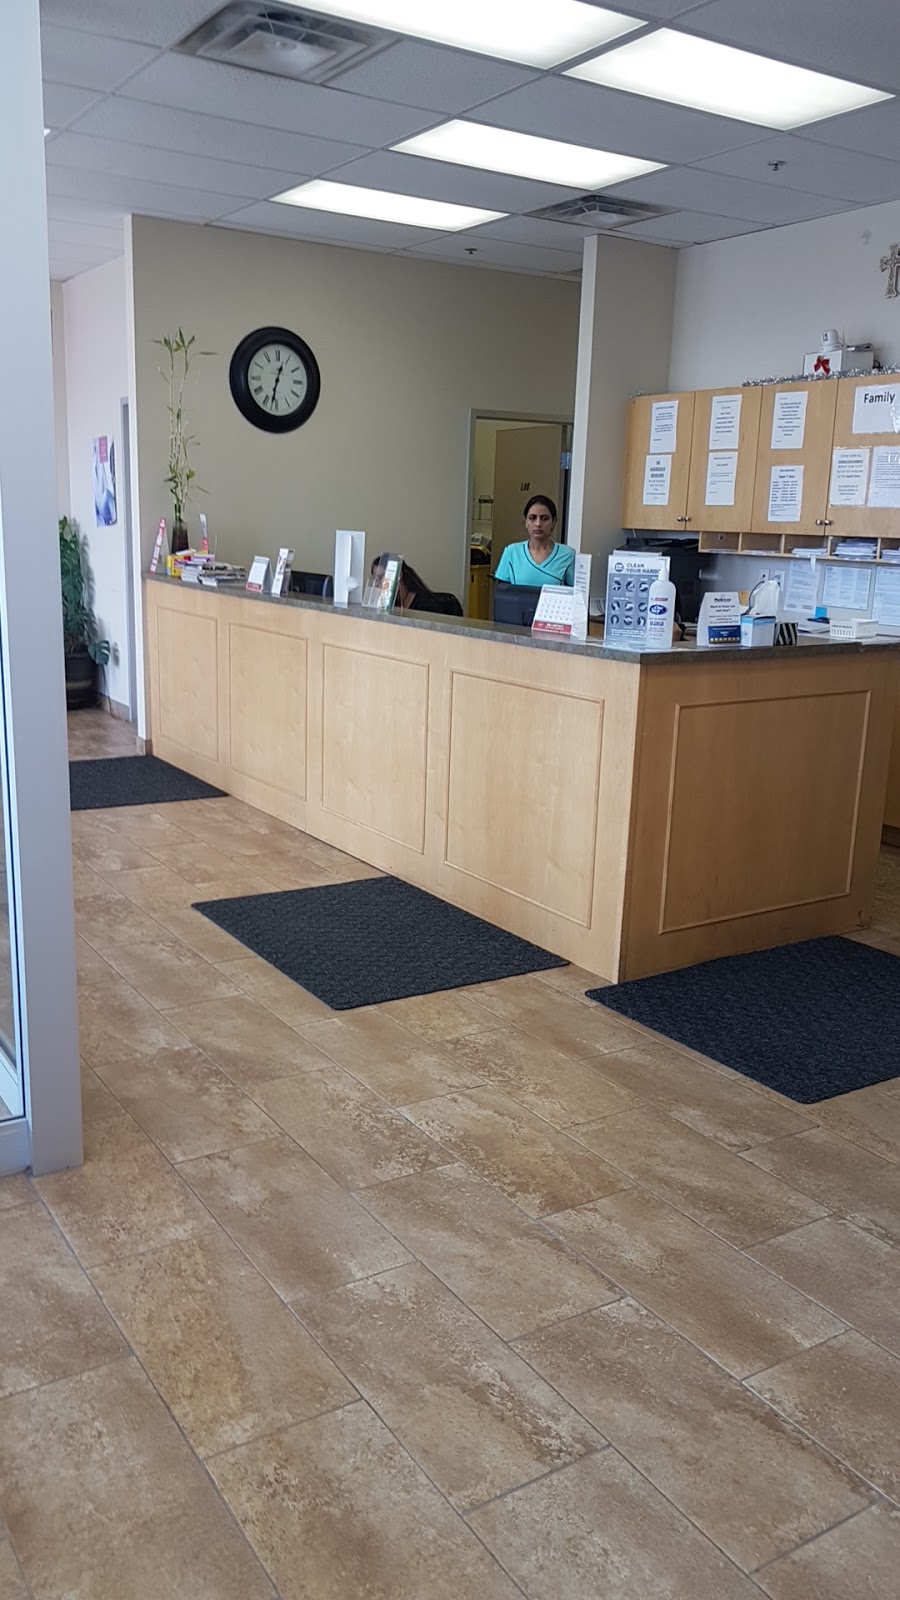 Chinguacousy and Sandalwood Medical Centre | health | 10671 Chinguacousy Rd #6, Brampton, ON L7A 0N5, Canada | 9058404343 OR +1 905-840-4343